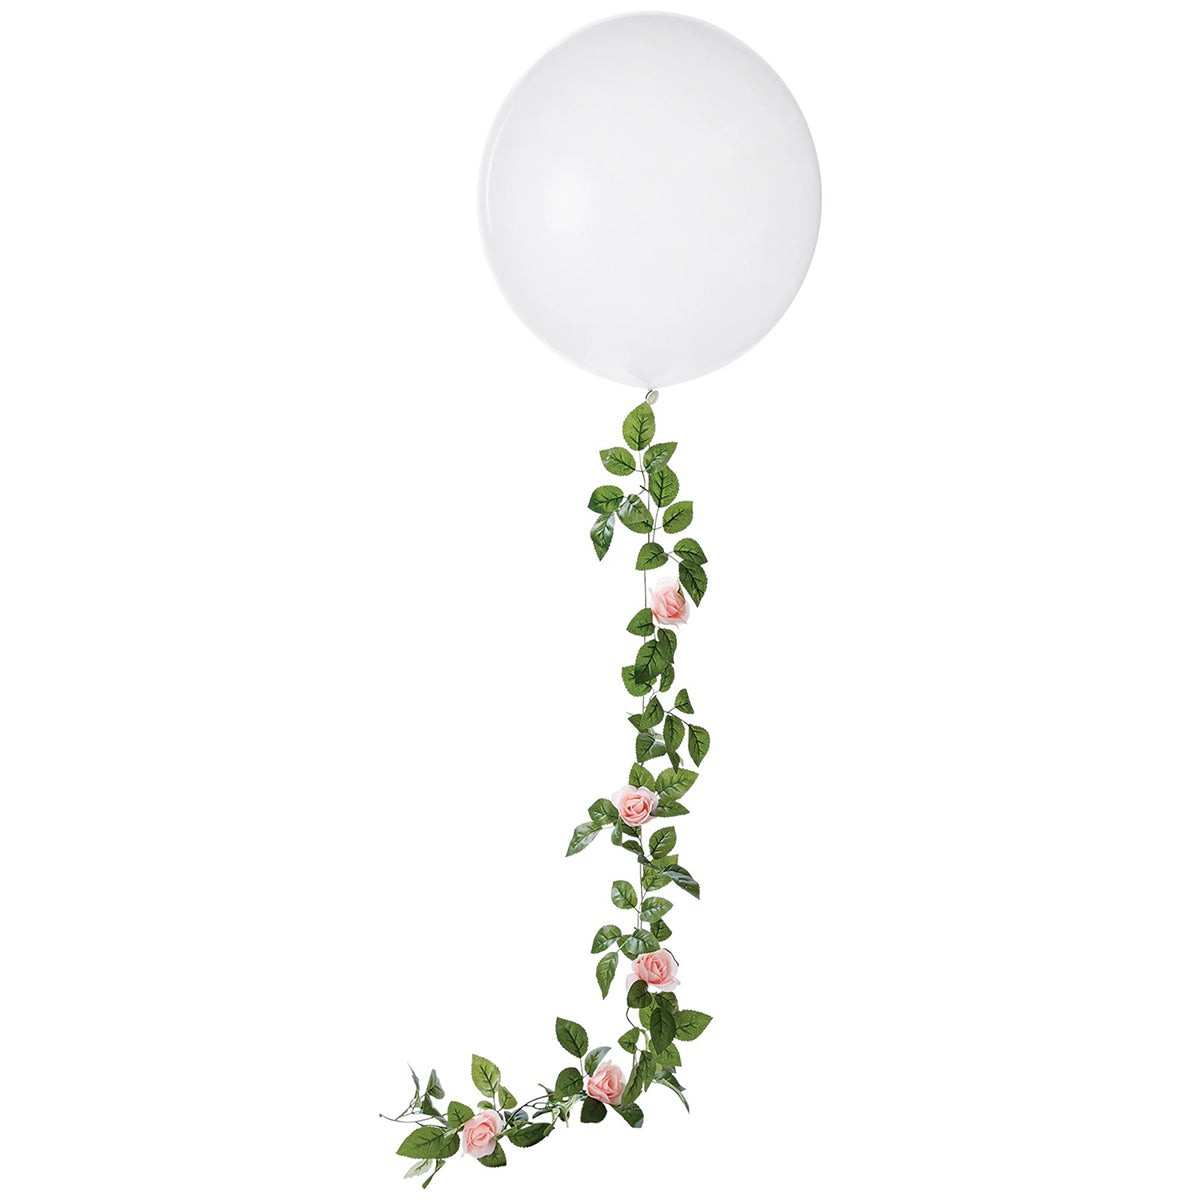 AMSCAN CA Bridal Shower Bridal Shower White Latex Balloon With Pink Flowers, Luxurious Shower Collection, 24 Inches, 1 Count 192937341919